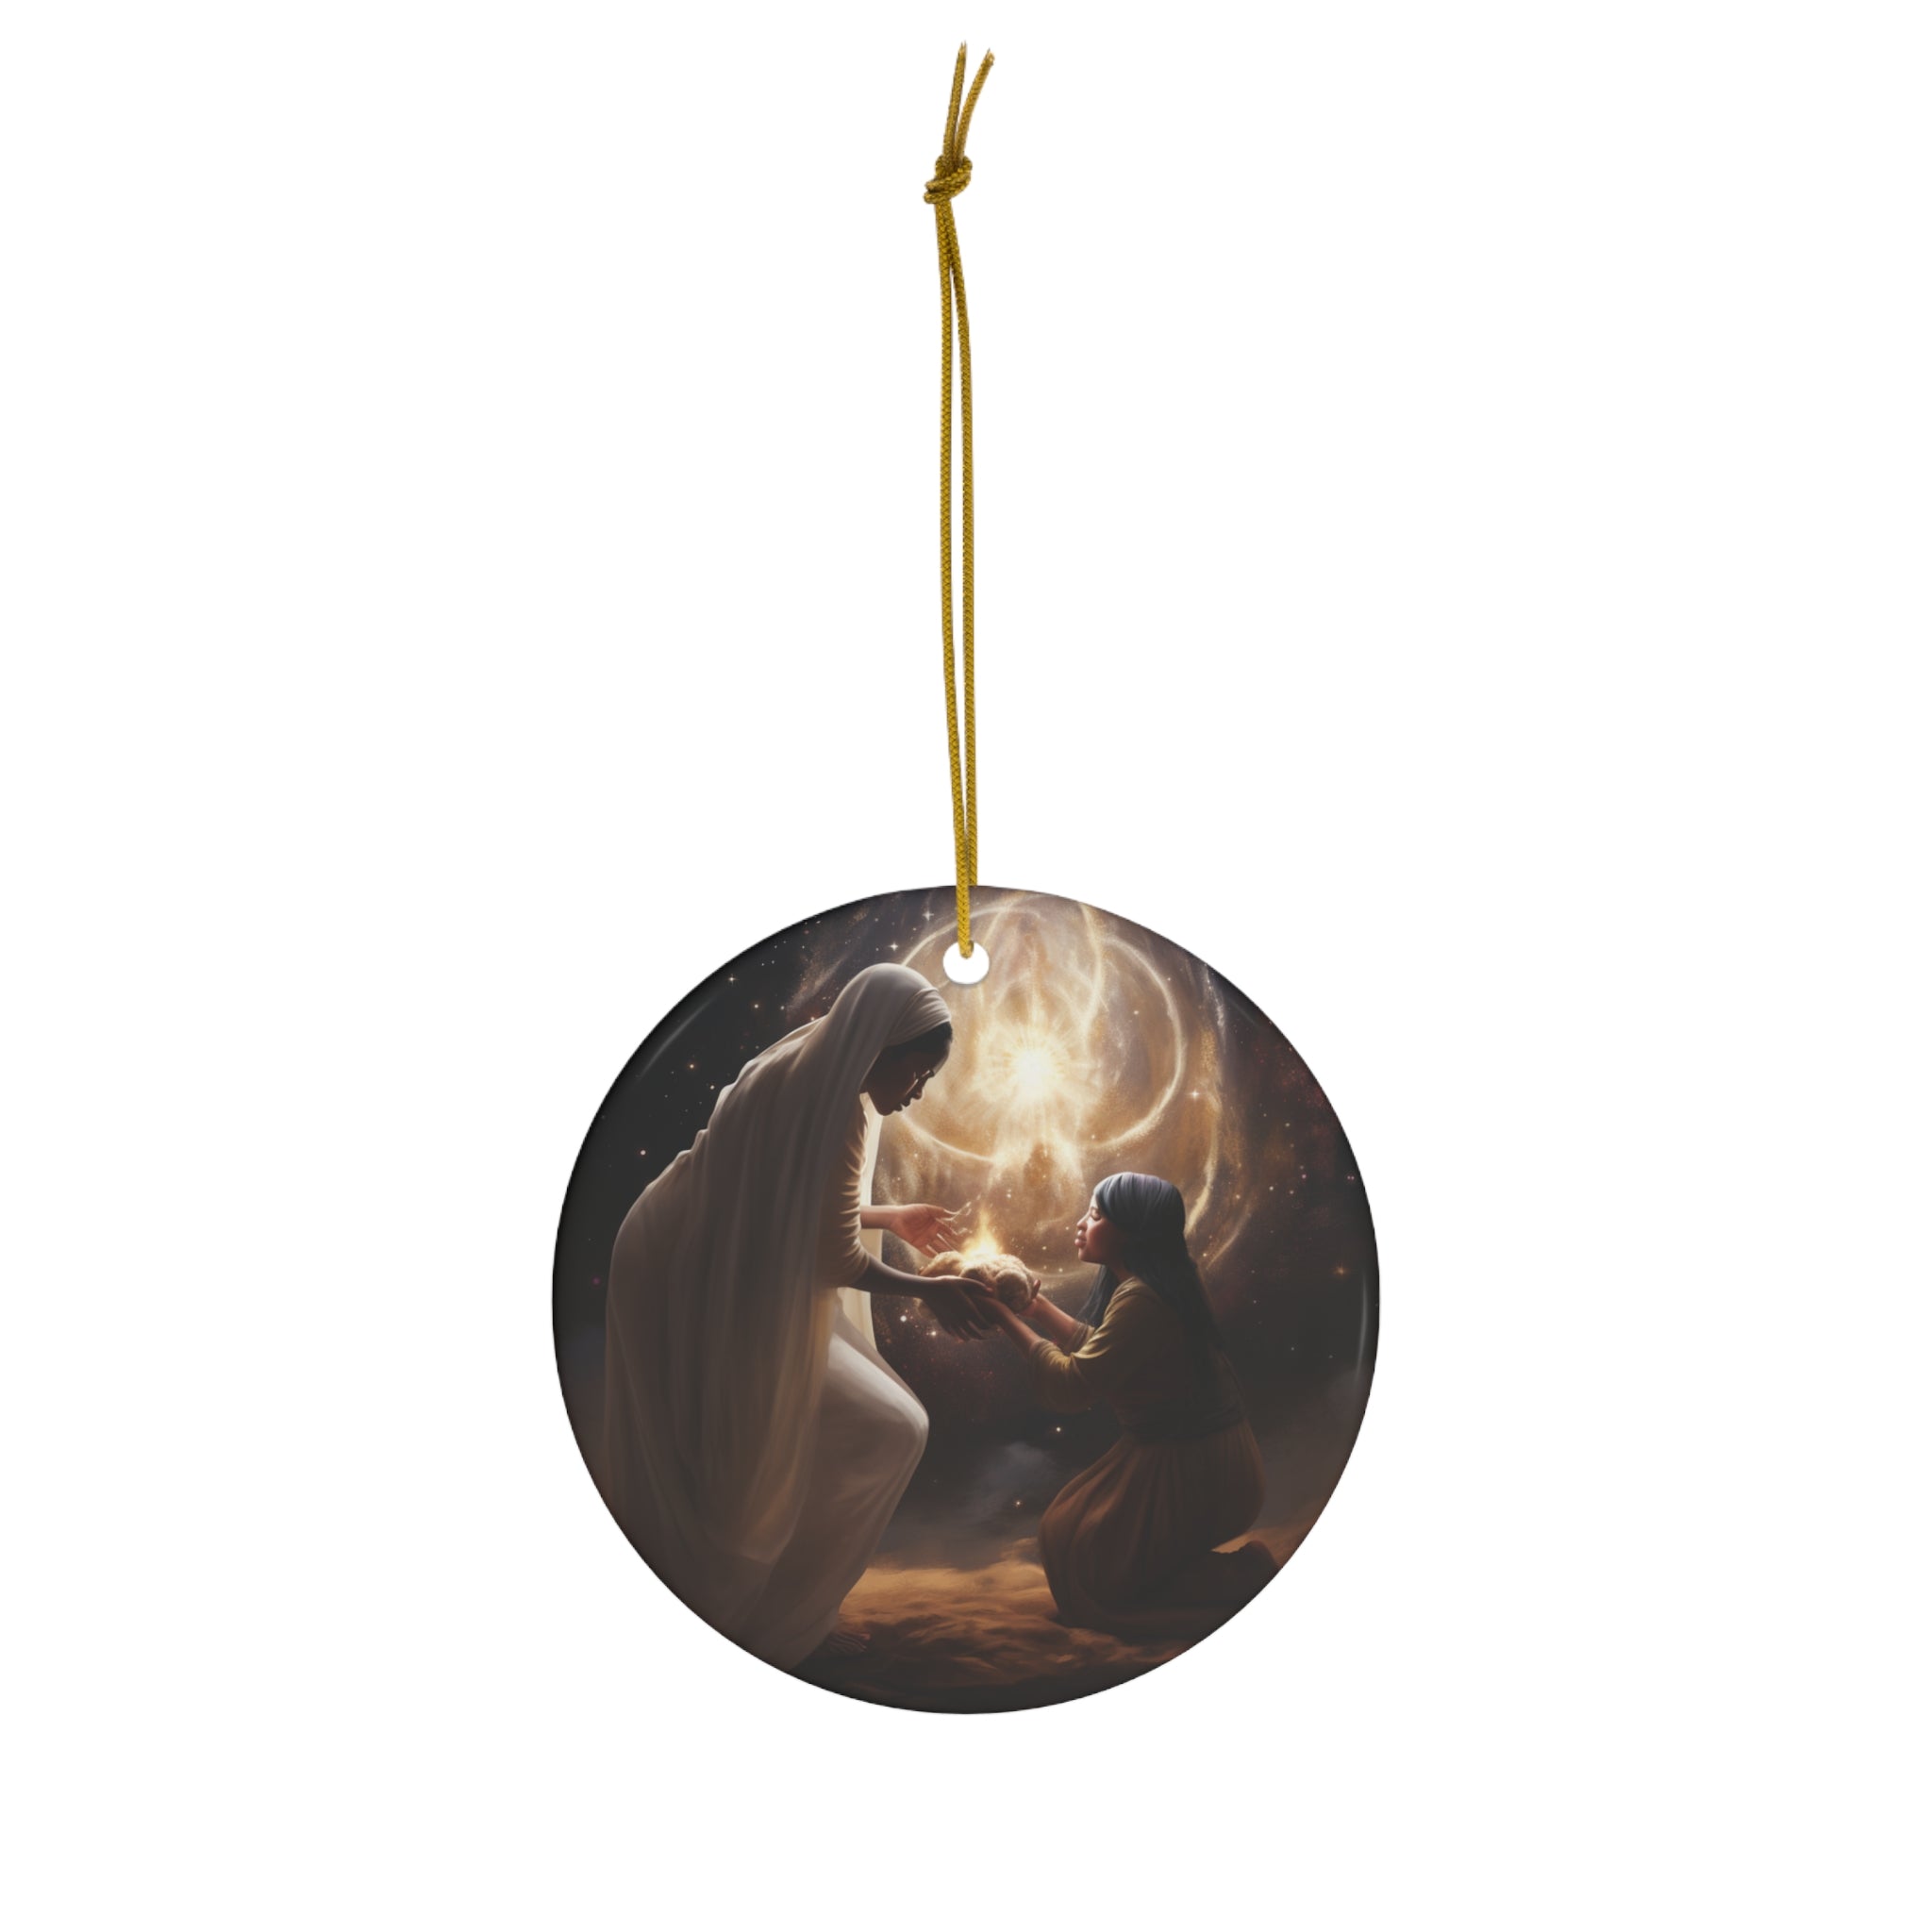 DistinctInk Hanging Ceramic Christmas Tree Ornament Charm with Gold String - Great Gift/Present - 2 3/4 inch Diameter -?Virgin Birth: Isaiah 7:14